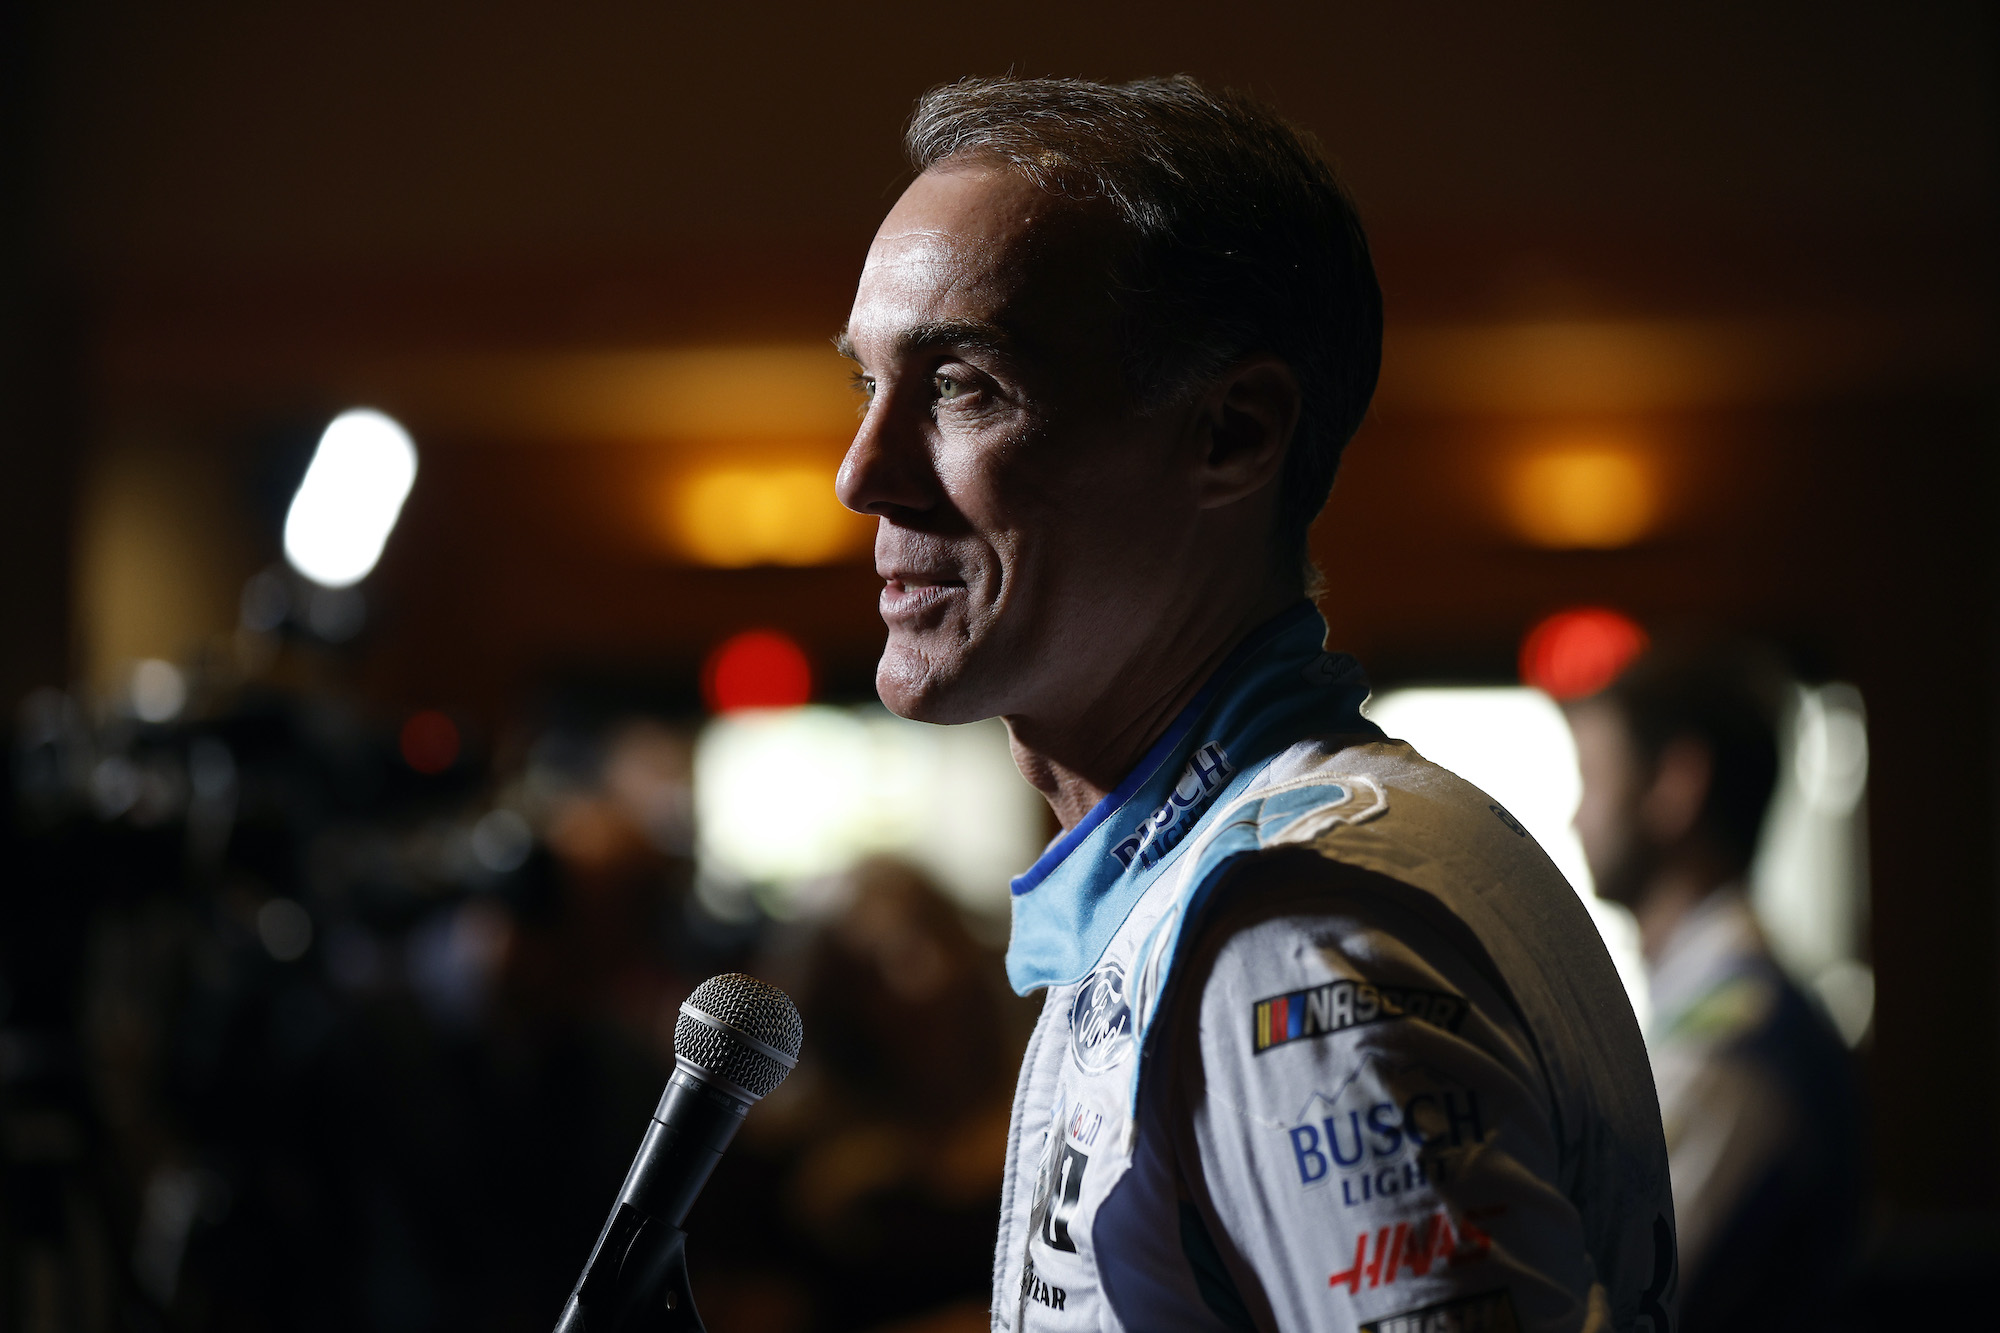 Kevin Harvick Reveals Reason for Escalated Twitter Activity: ‘I Finally Just Said, “Eff It, I’m Done”‘